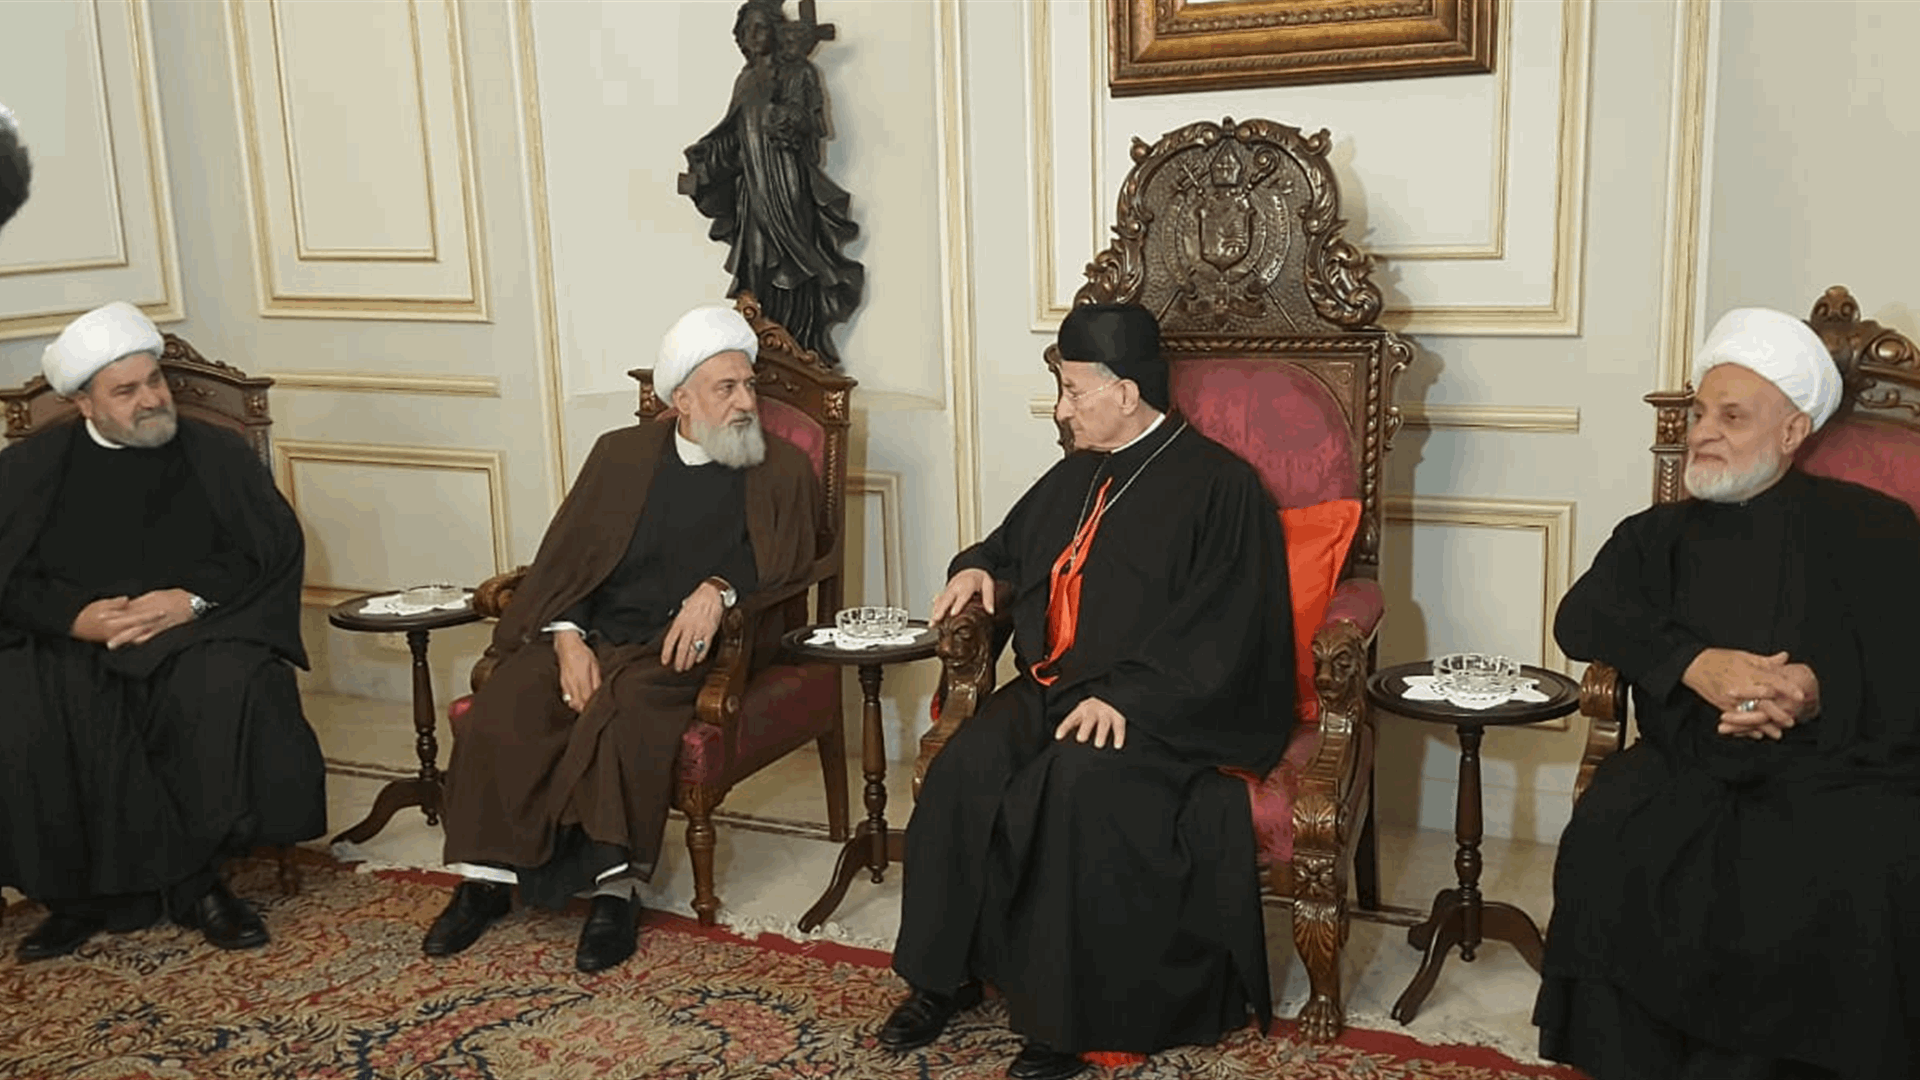 UNIFIL&#39;s &#39;passivity&#39; criticized: Lebanese religious leaders call for united &#39;front&#39; amid regional developments 